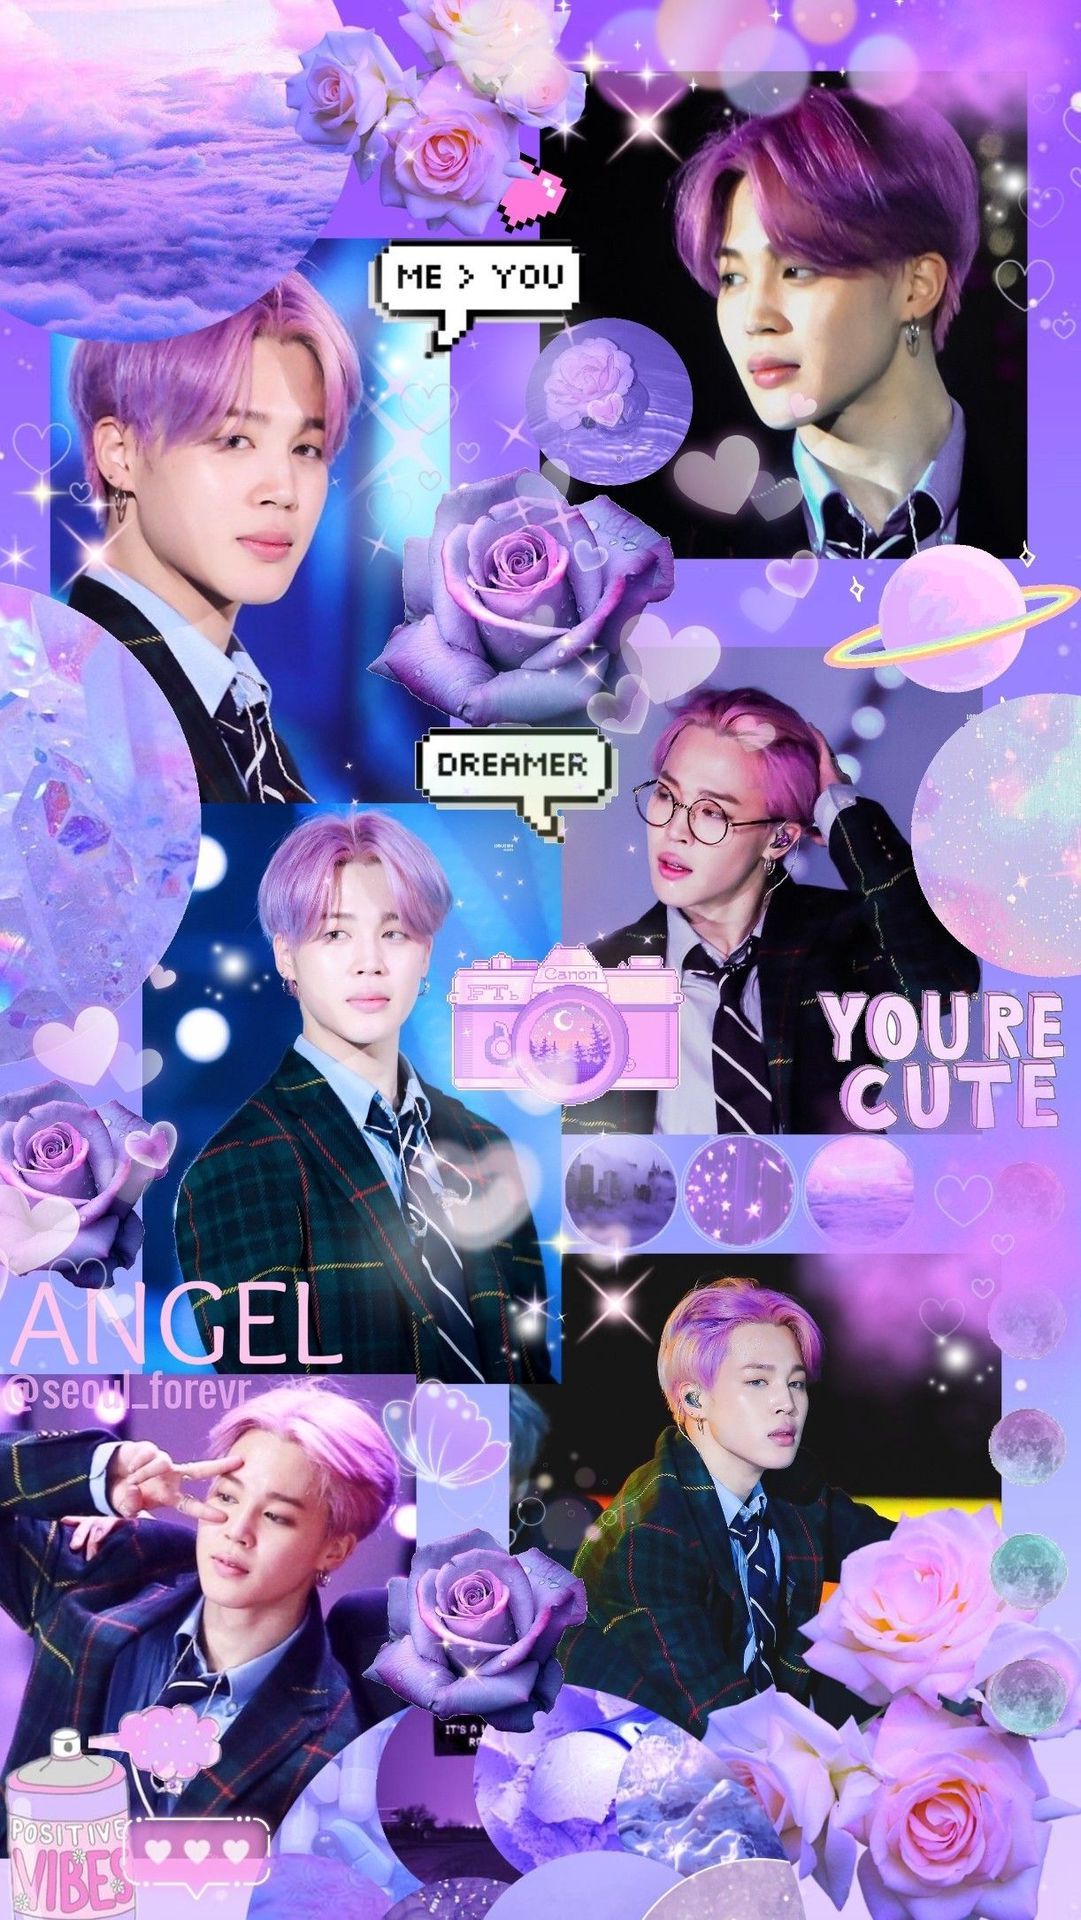 Purple aesthetic wallpaper with jimin and other members of bts - Jimin